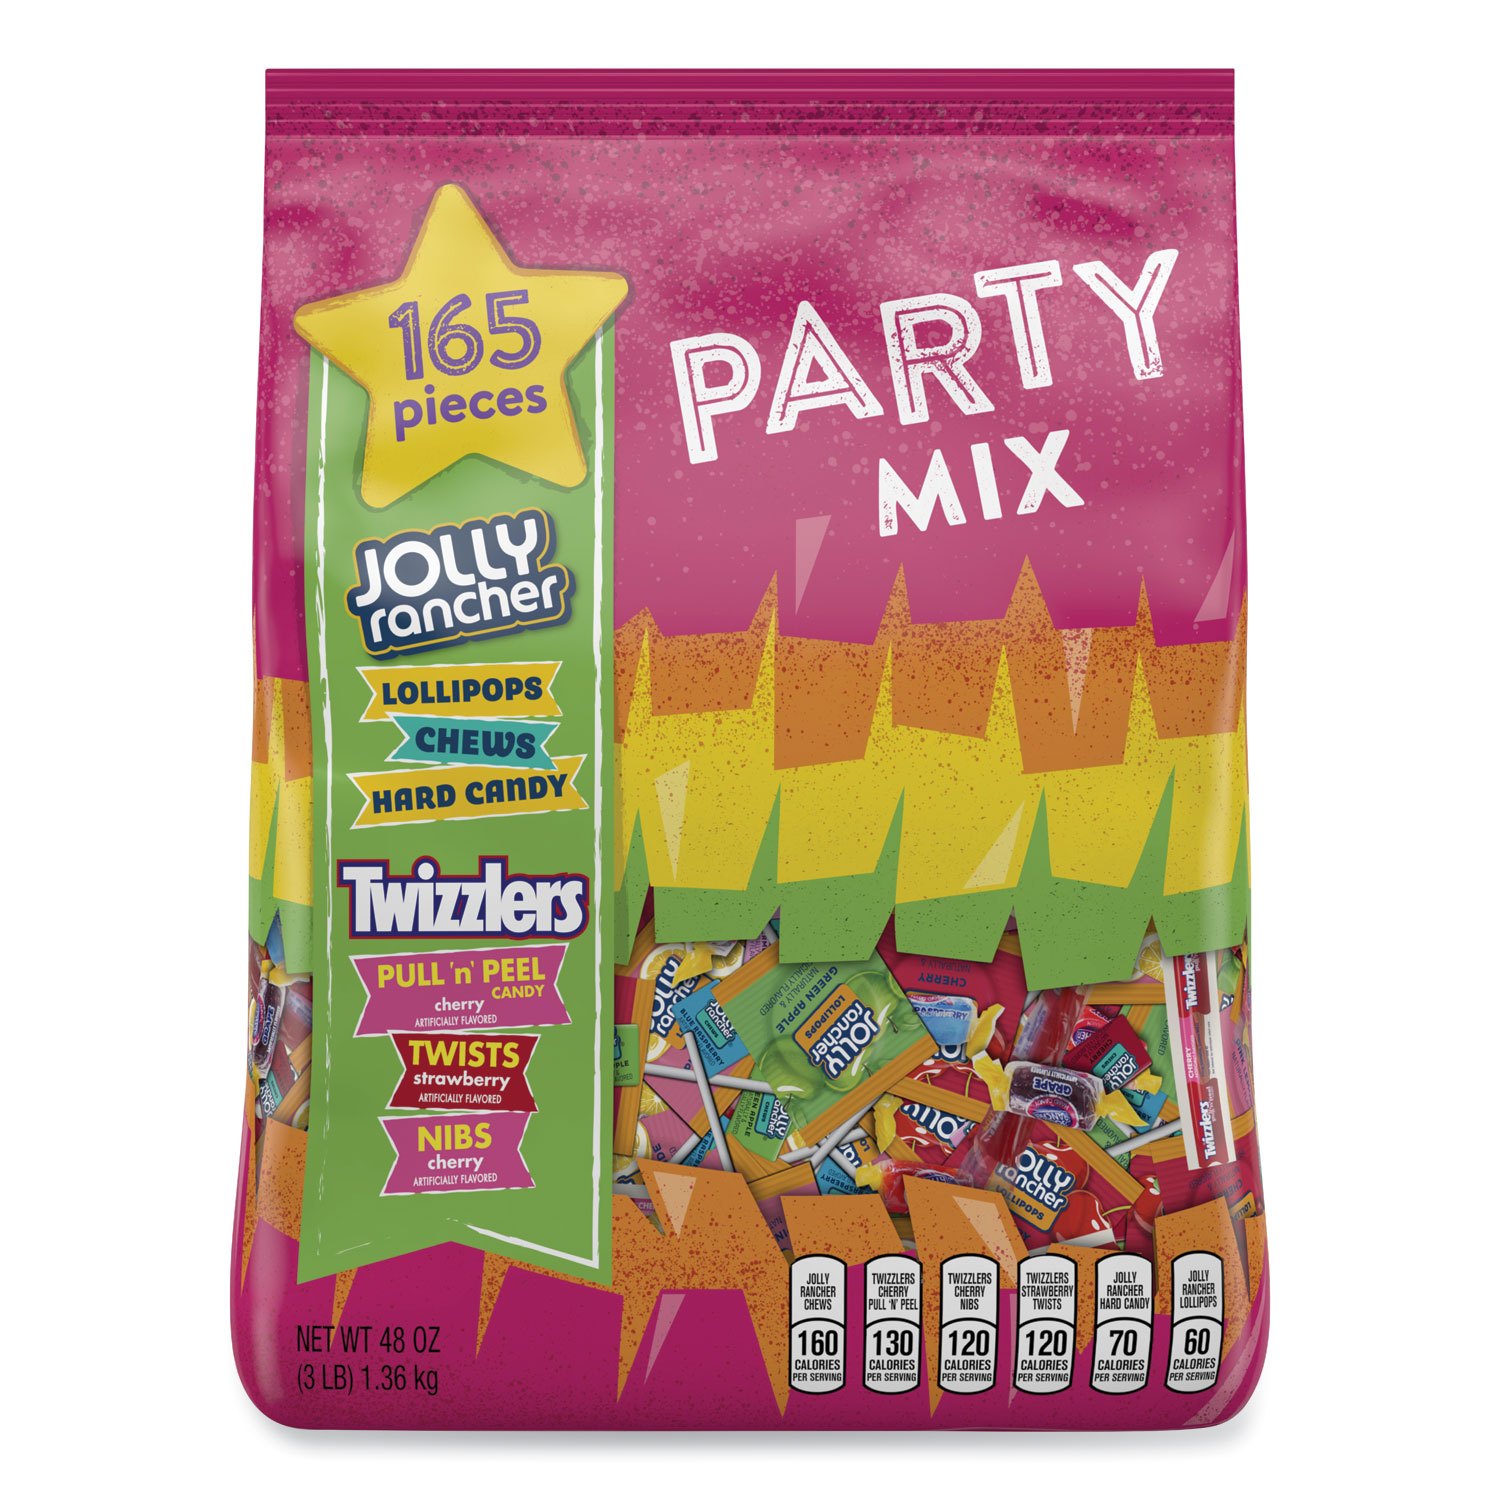  Hershey's HEC02201 Party Mix Assorted Bulk Pack Candy, 165 Pieces, 48 oz (HRS2895499) 